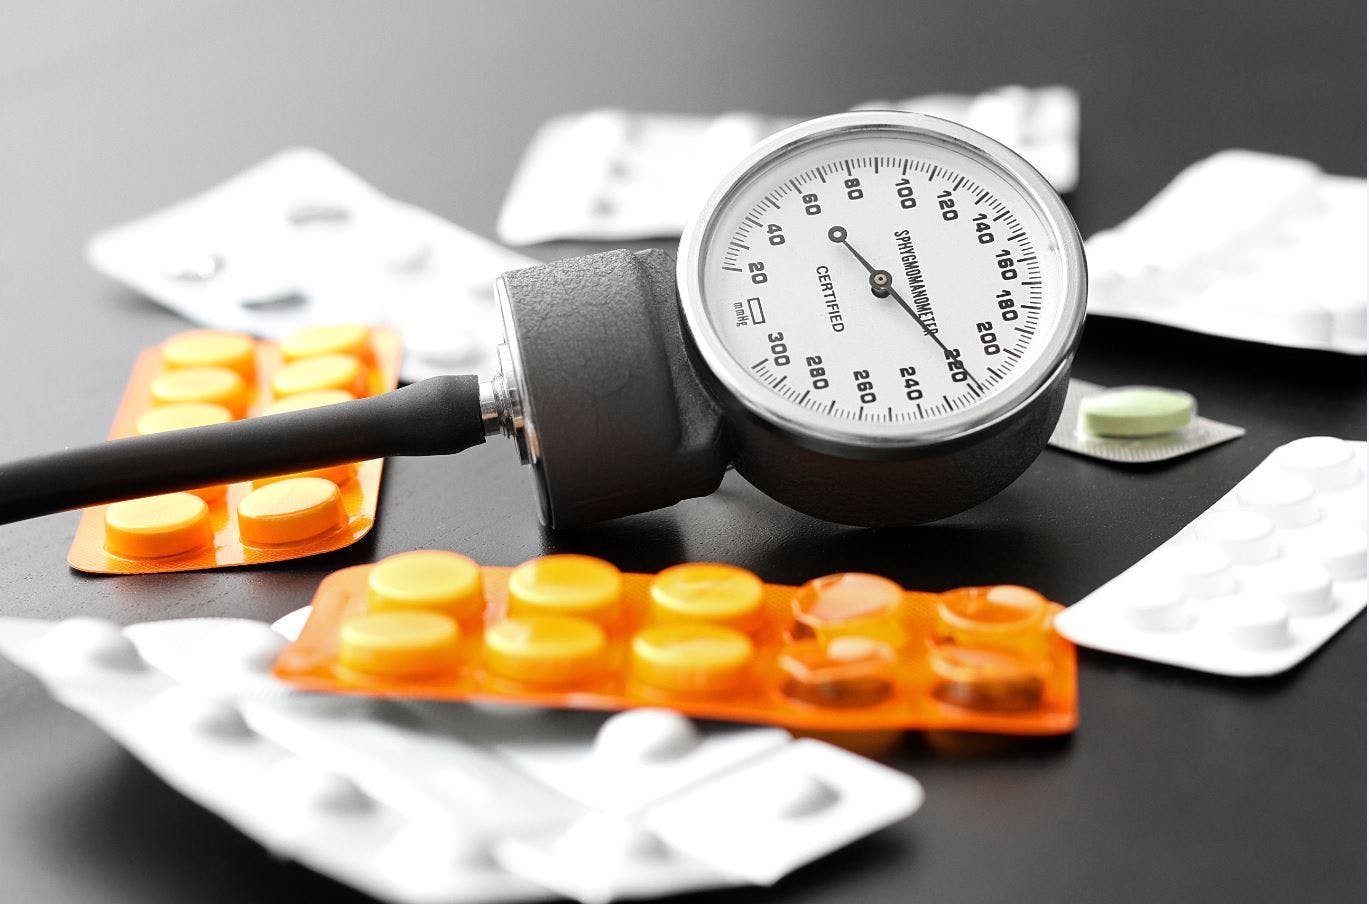 Zilebesiran Reduces Hypertension as Addition to Standard of Care in Phase 2 KARDIA-2 Trial / image credit blood pressure cuff and medications: ©Rostick/stock.adobe.com